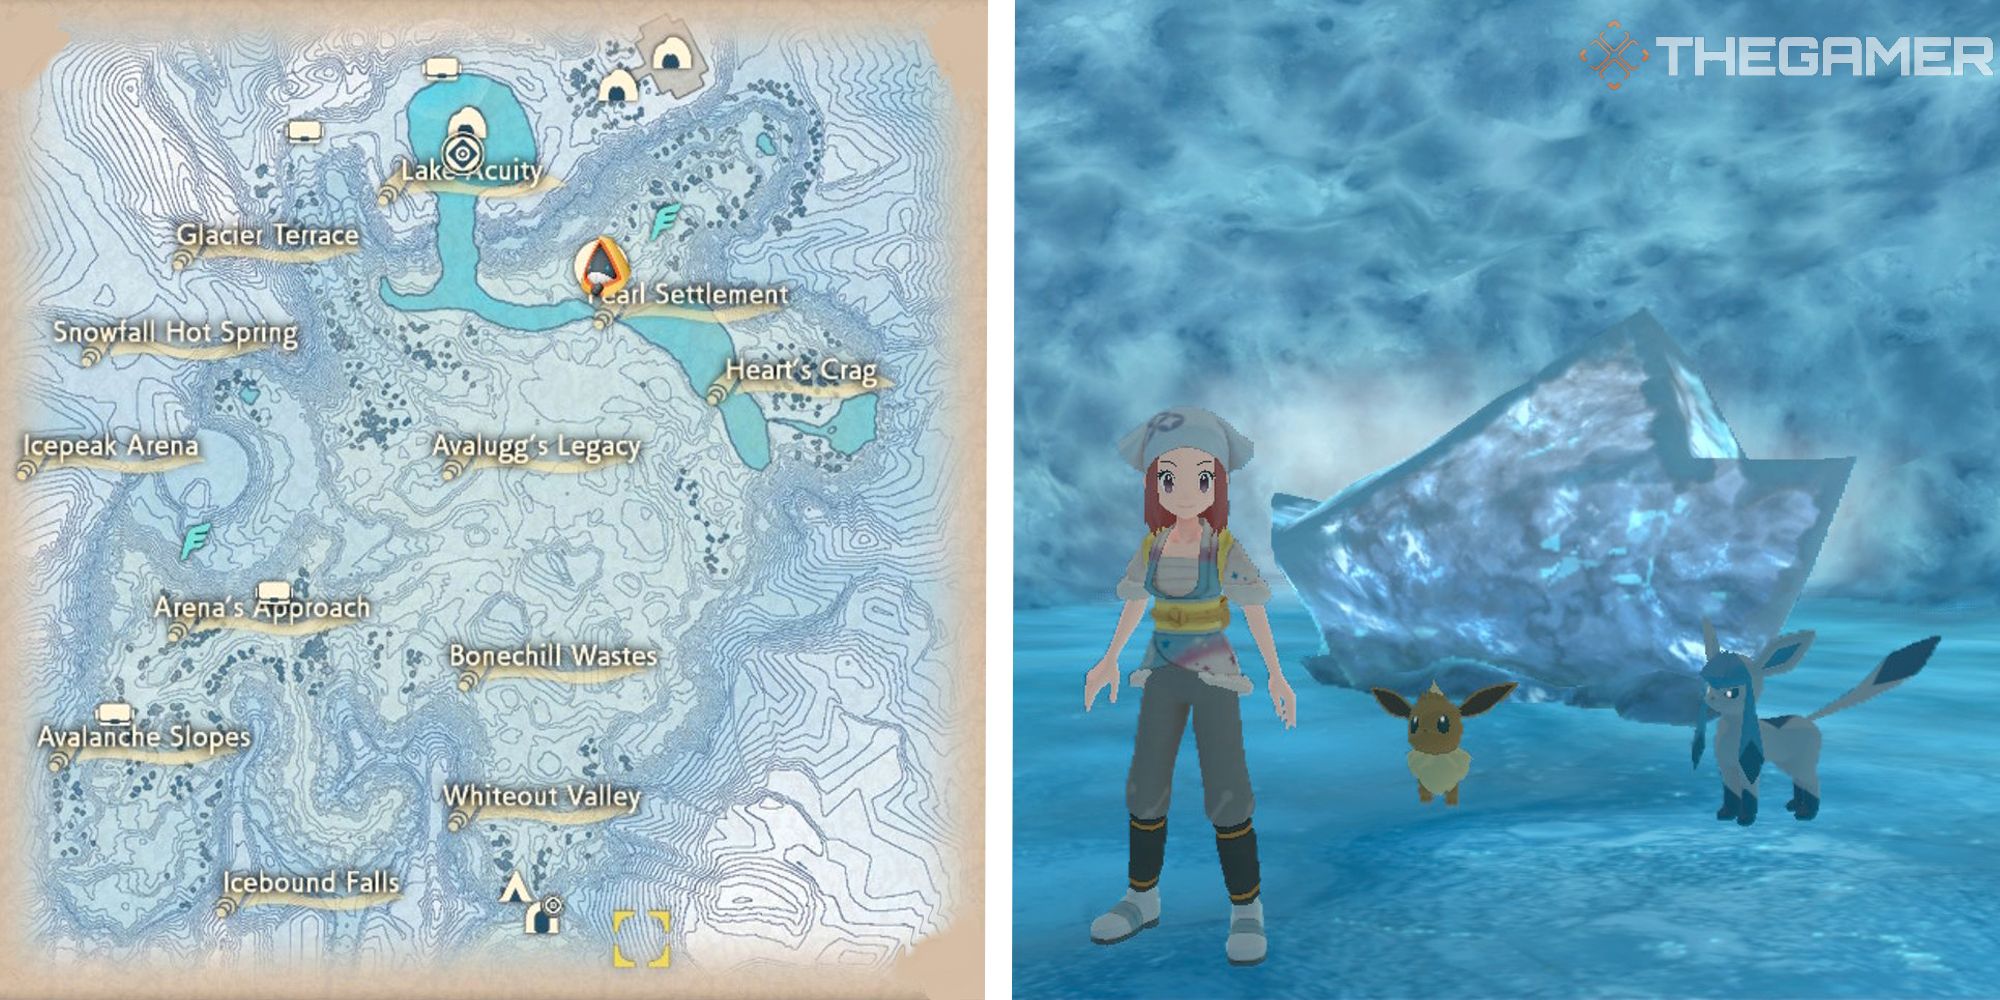 map of alabaster icelands next to image of player standing near ice rock with eevee and glaceon